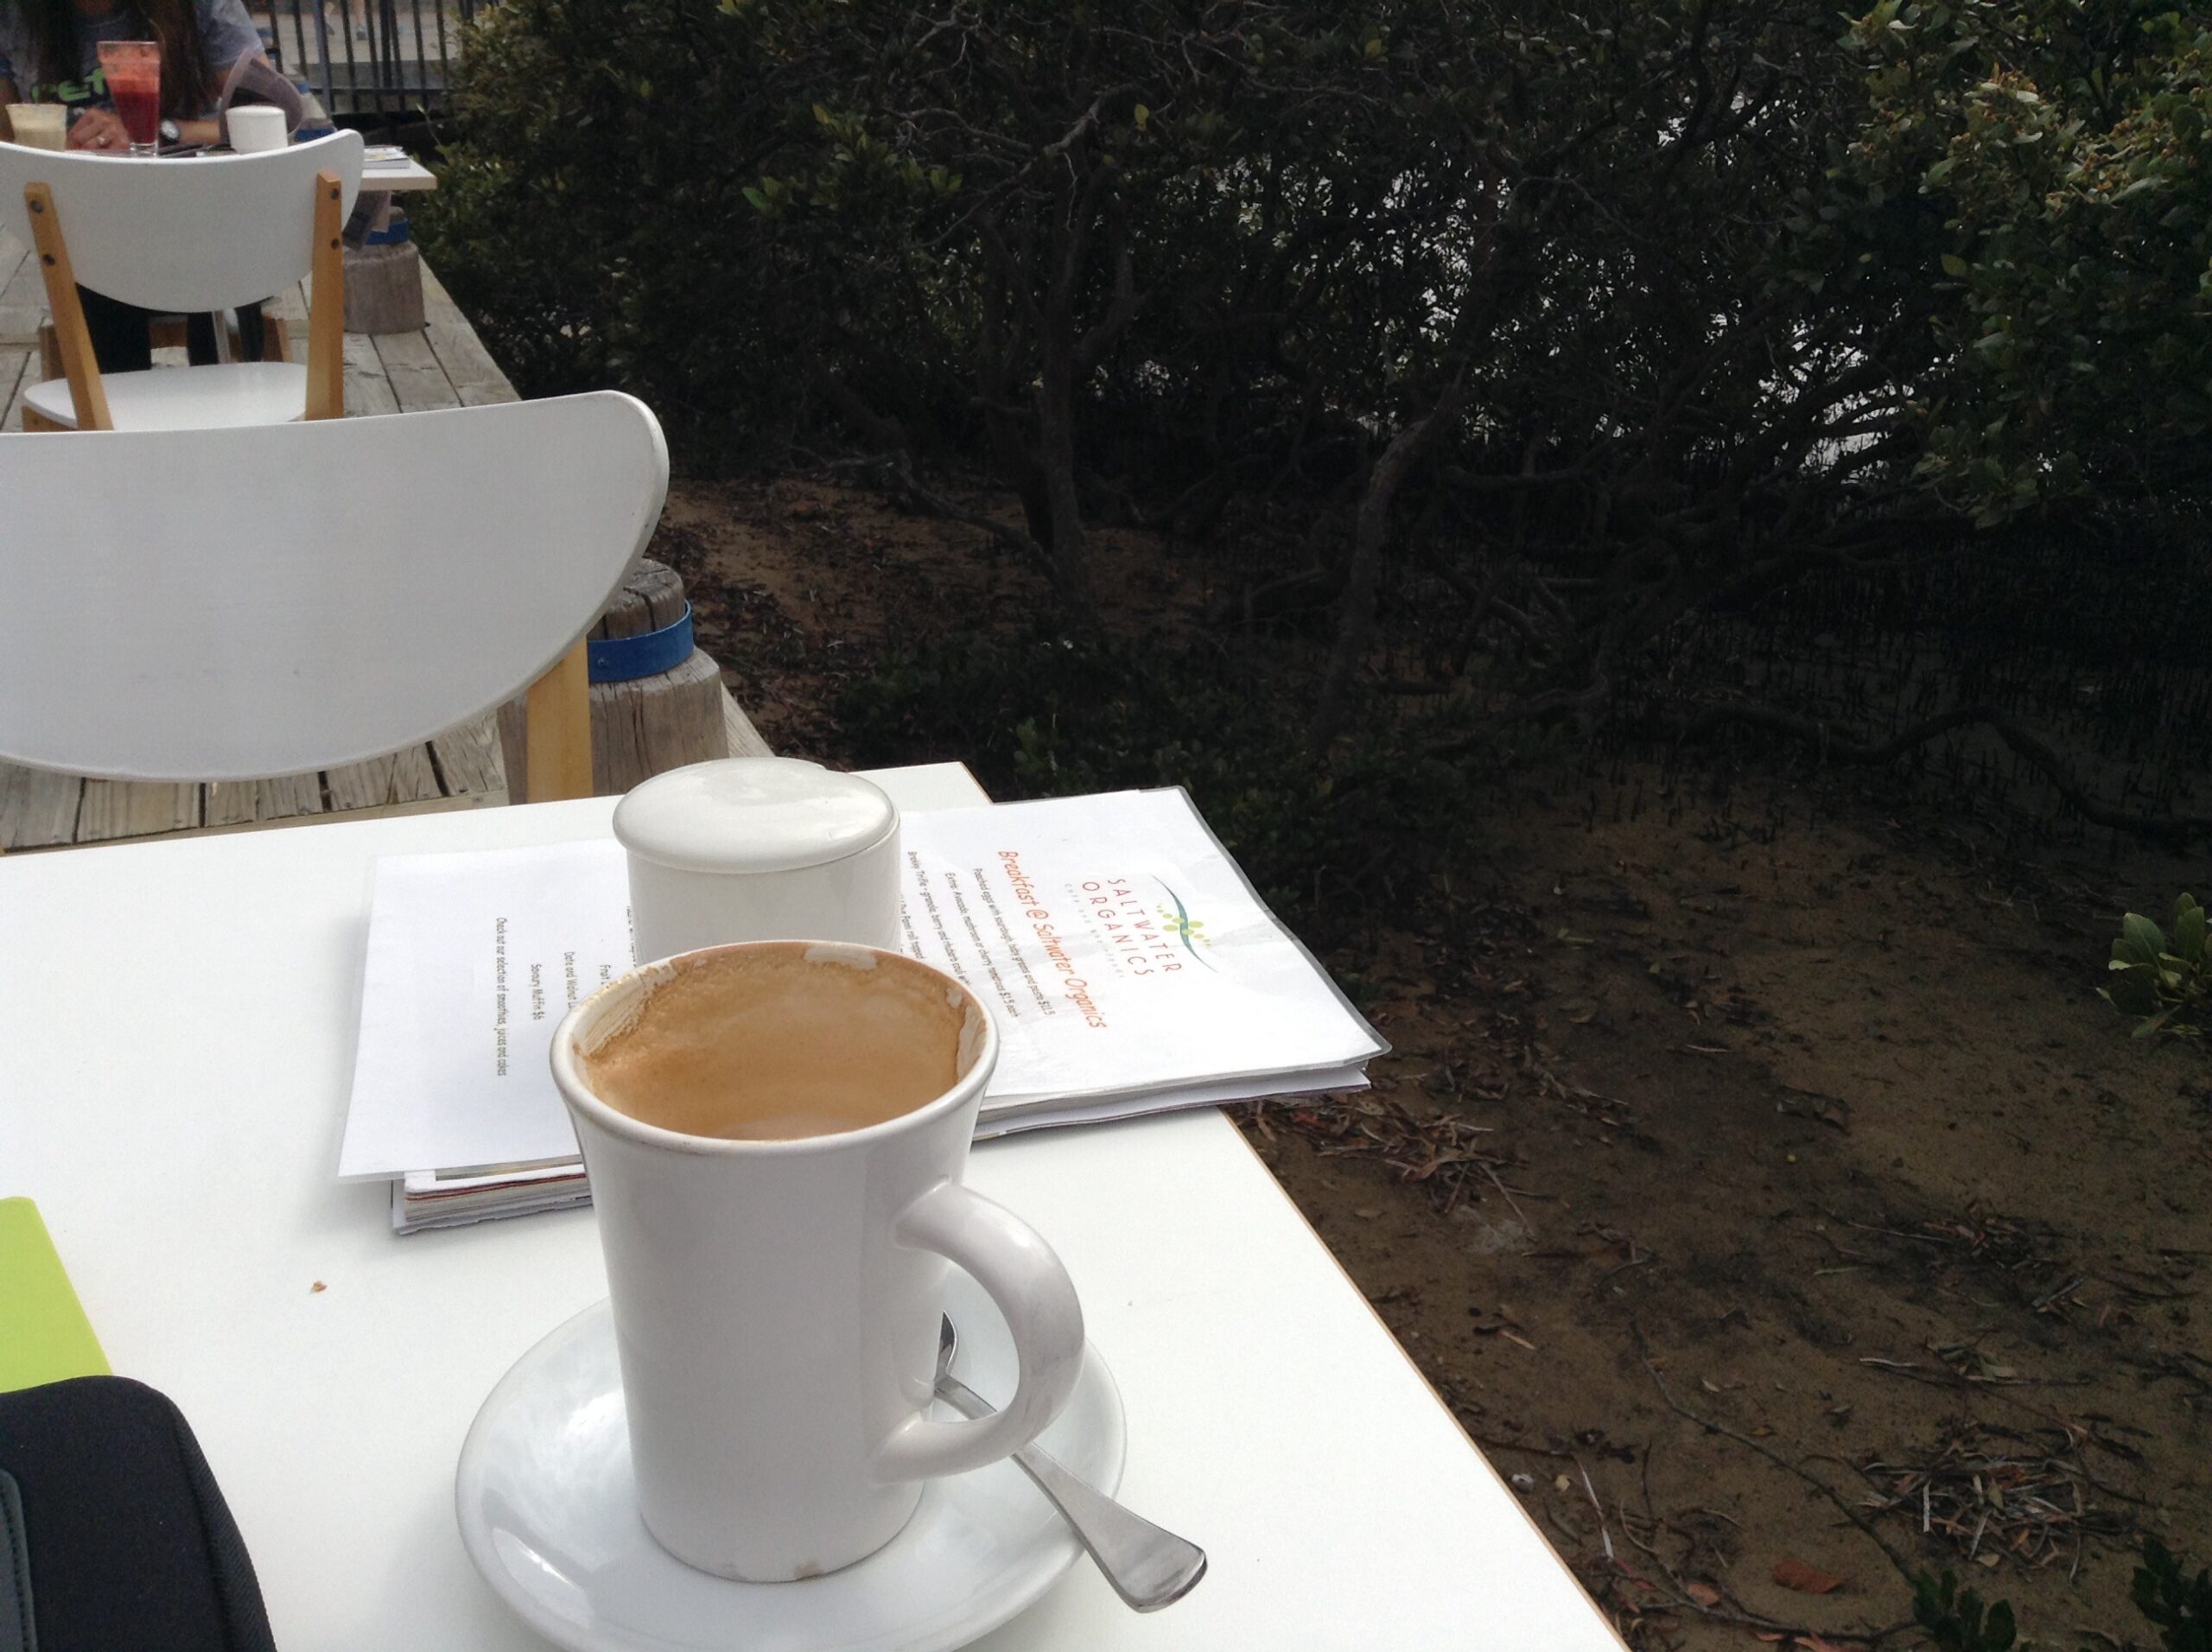 coffee cup at the mangroves, nicotine withdrawal